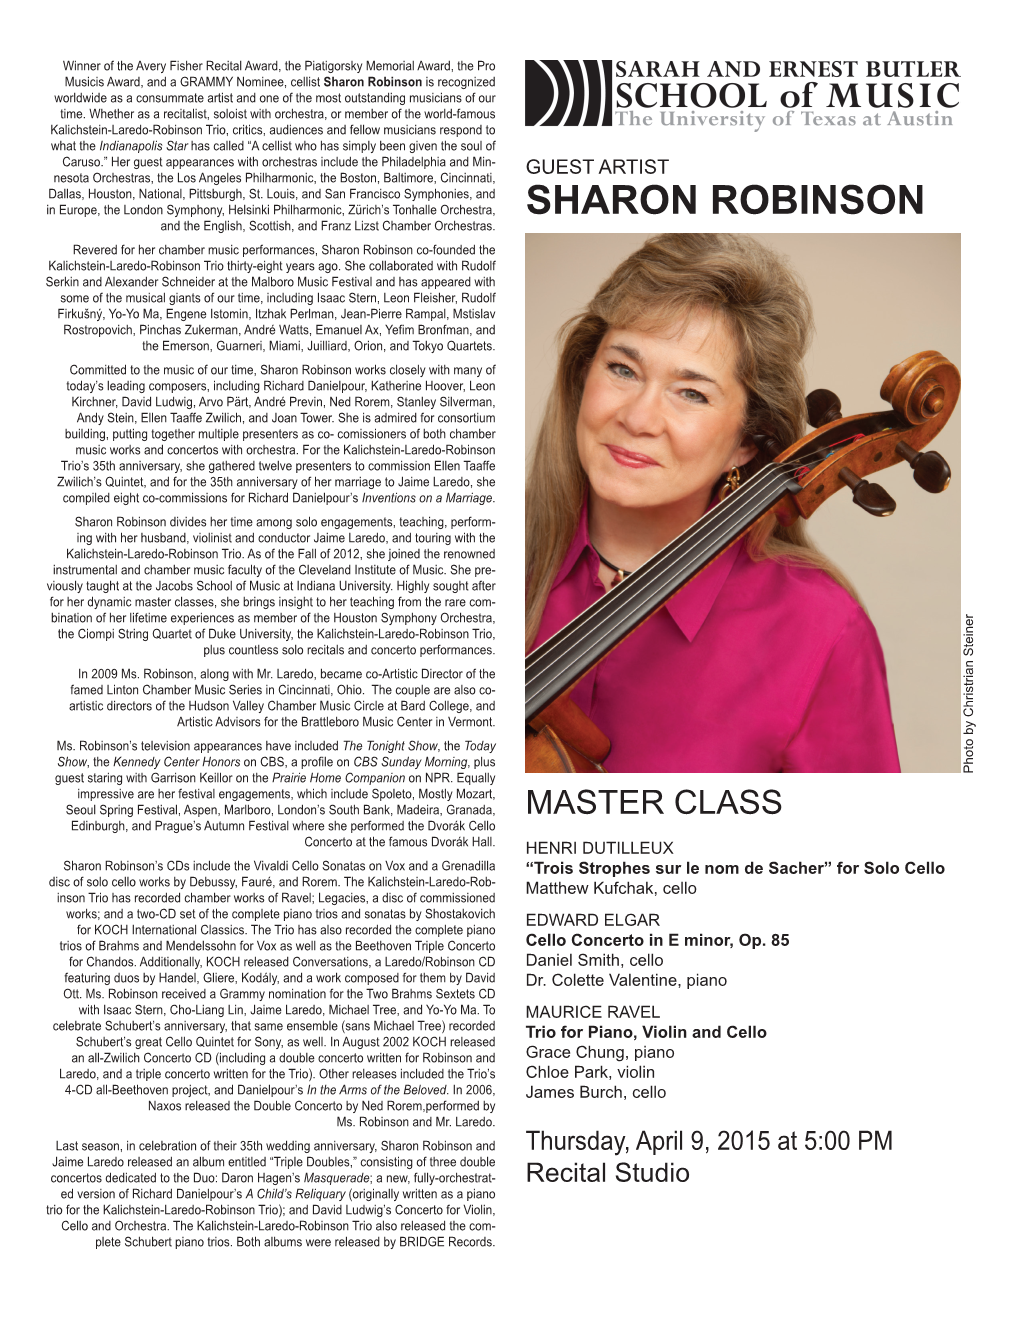 Sharon Robinson Is Recognized Worldwide As a Consummate Artist and One of the Most Outstanding Musicians of Our Time